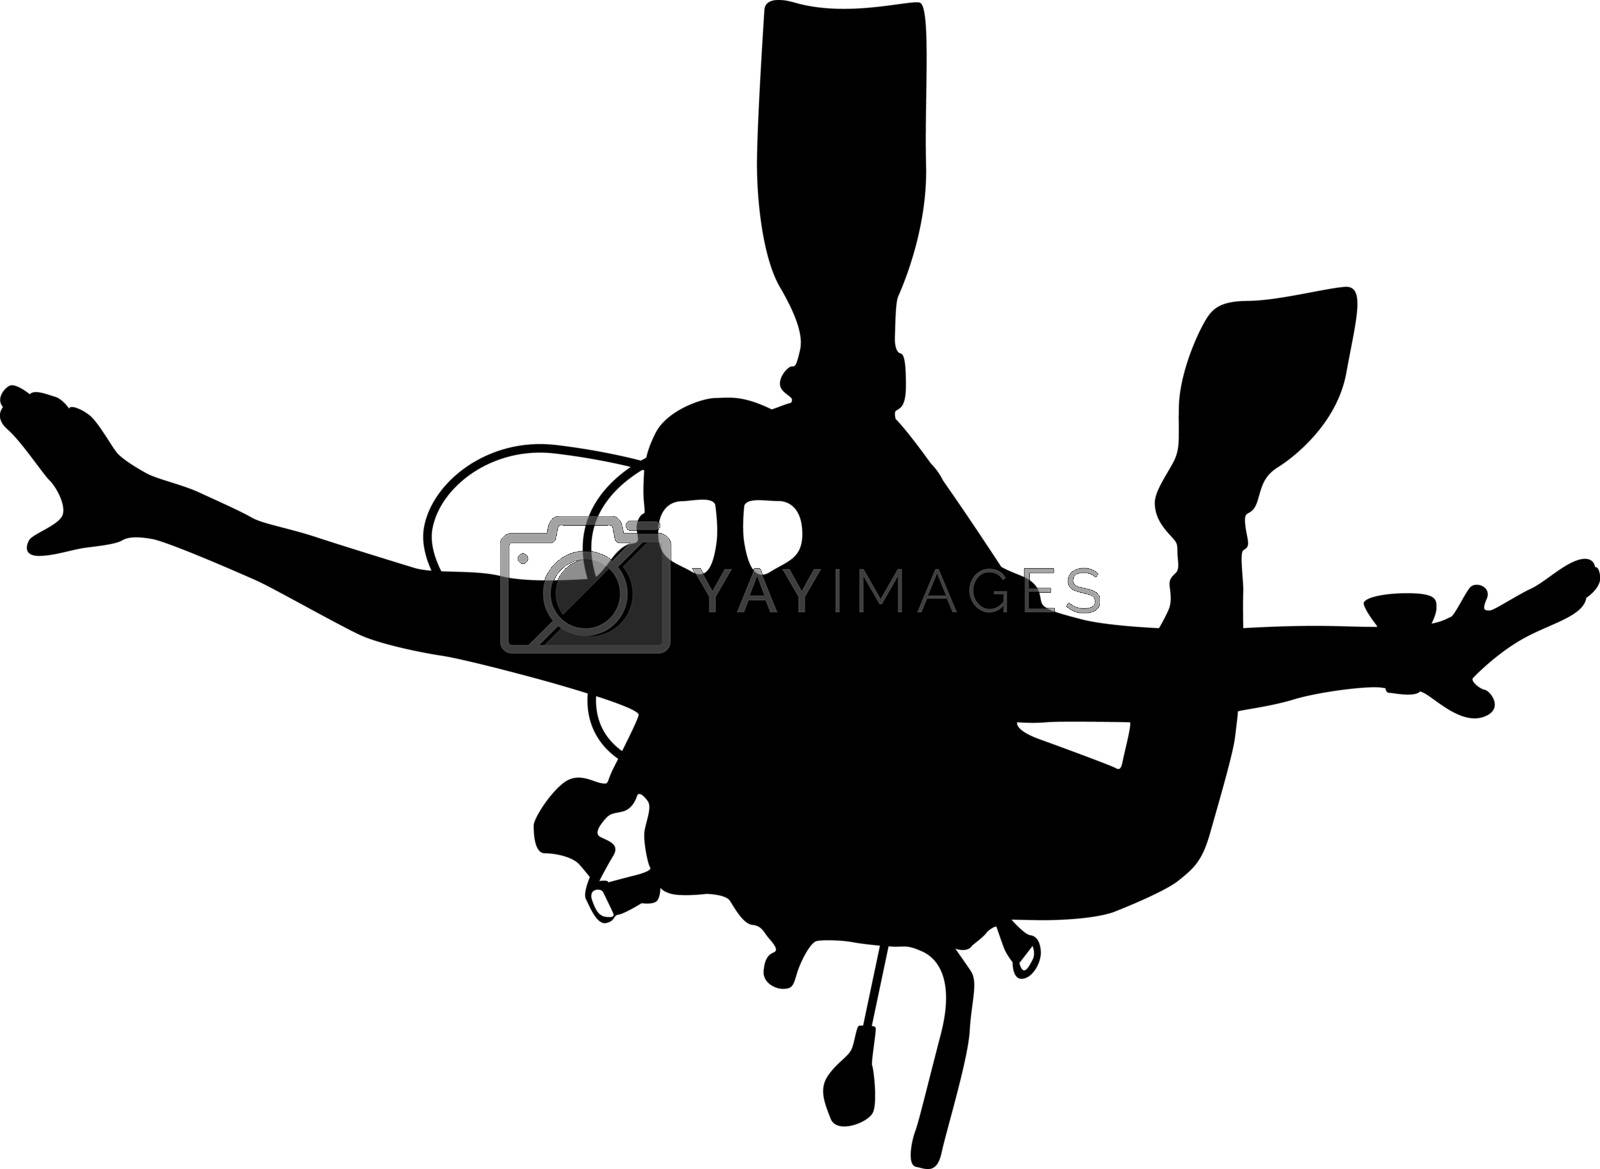 Royalty free image of Black silhouette scuba divers. Vector illustration. by aarrows